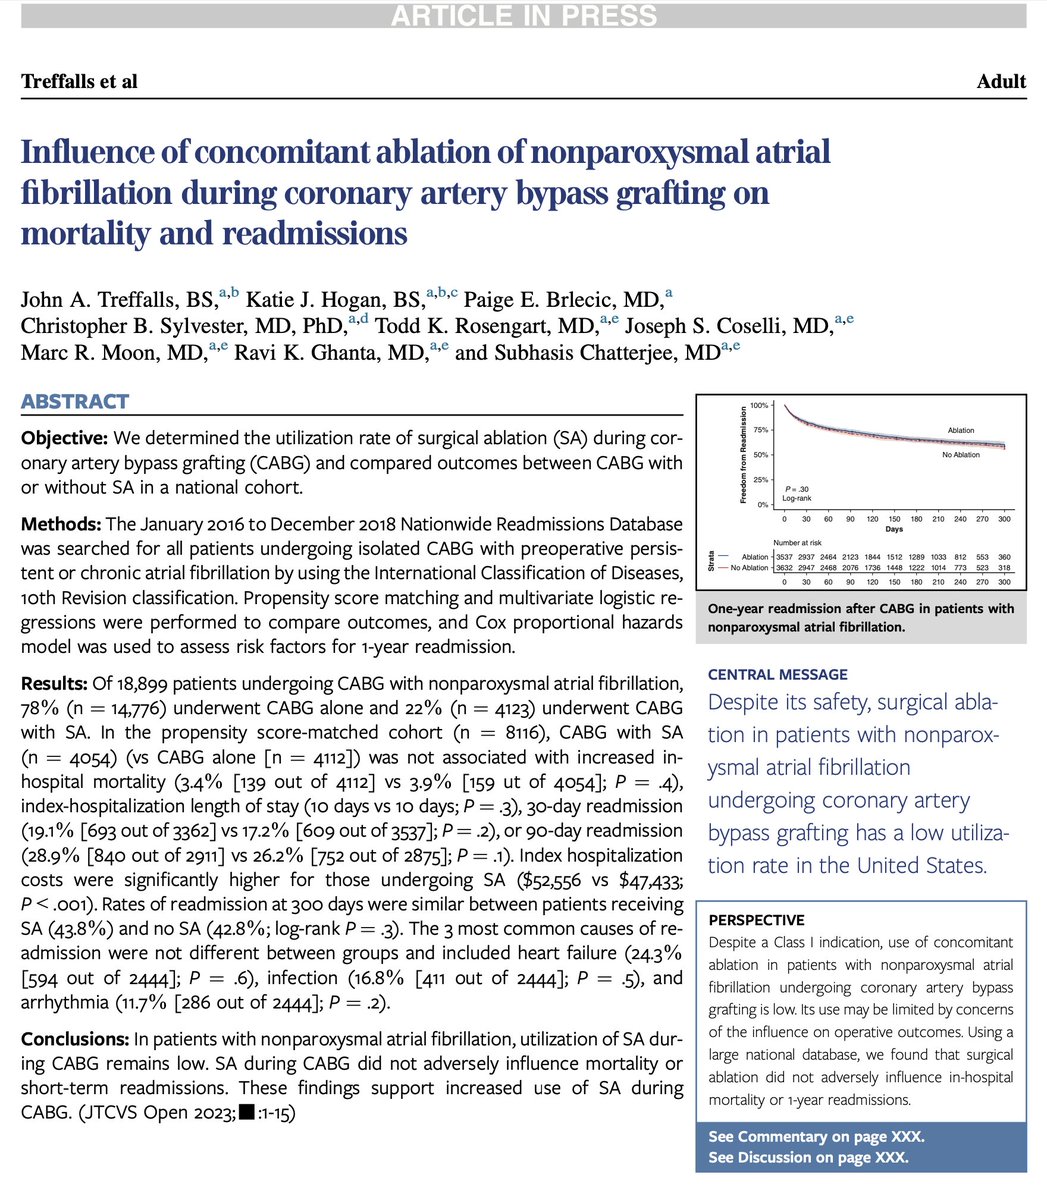 Finally published in @AATSJournals! Always grateful to my @BCM_CTSurgery mentors @SXC71 and @DrRaviGhanta for their continued support. - Surgical ablation is underutilized (22%) in CABG patients with non-paroxysmal AF. - Ablation did not ⬆️ LOS, mortality, or 1-year readmission